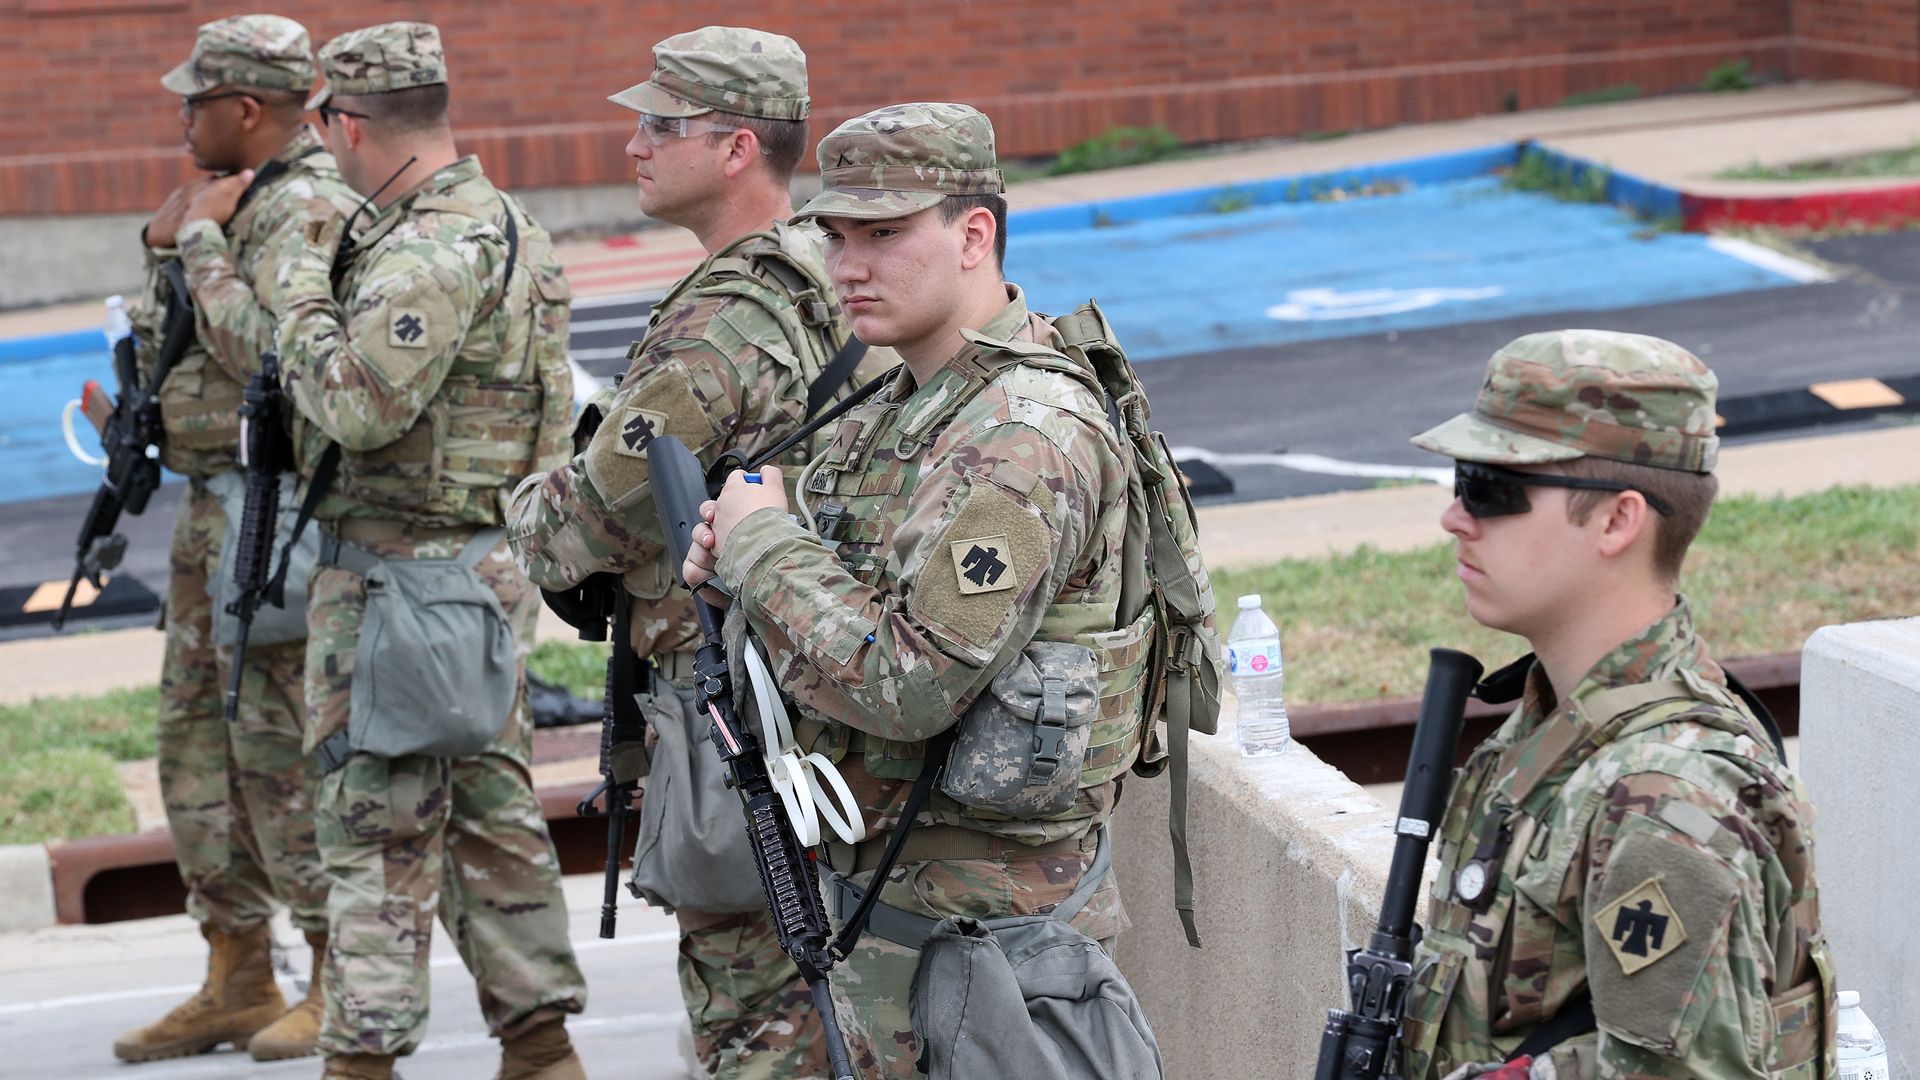 Members of the Oklahoma National Guard are on standby ahead of a campaign rally for a U.S. President Donald Trump at the BOK Center, June 20, 2020 in Tulsa, Oklahoma